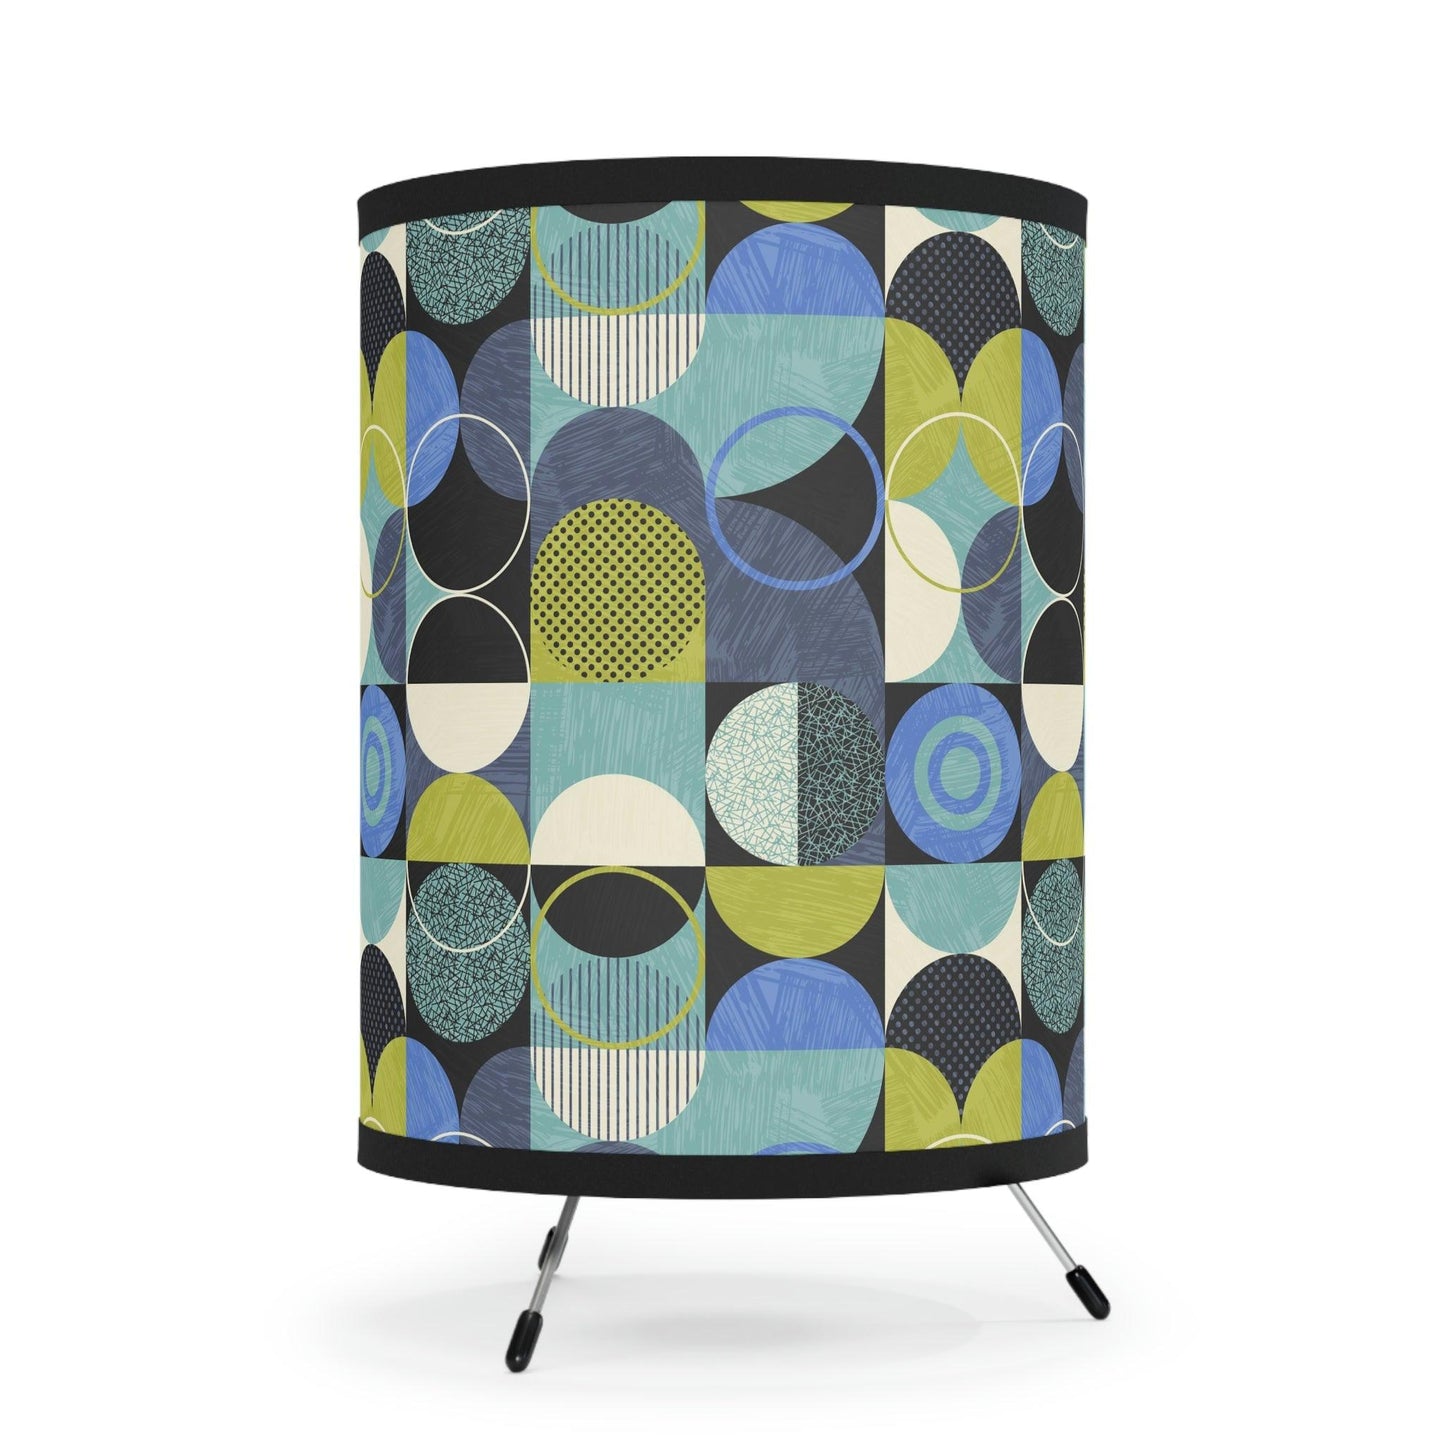 Retro Mid Century Mod Abstract Blue and Green Tripod Tabletop Accent Lamp | lovevisionkarma.com